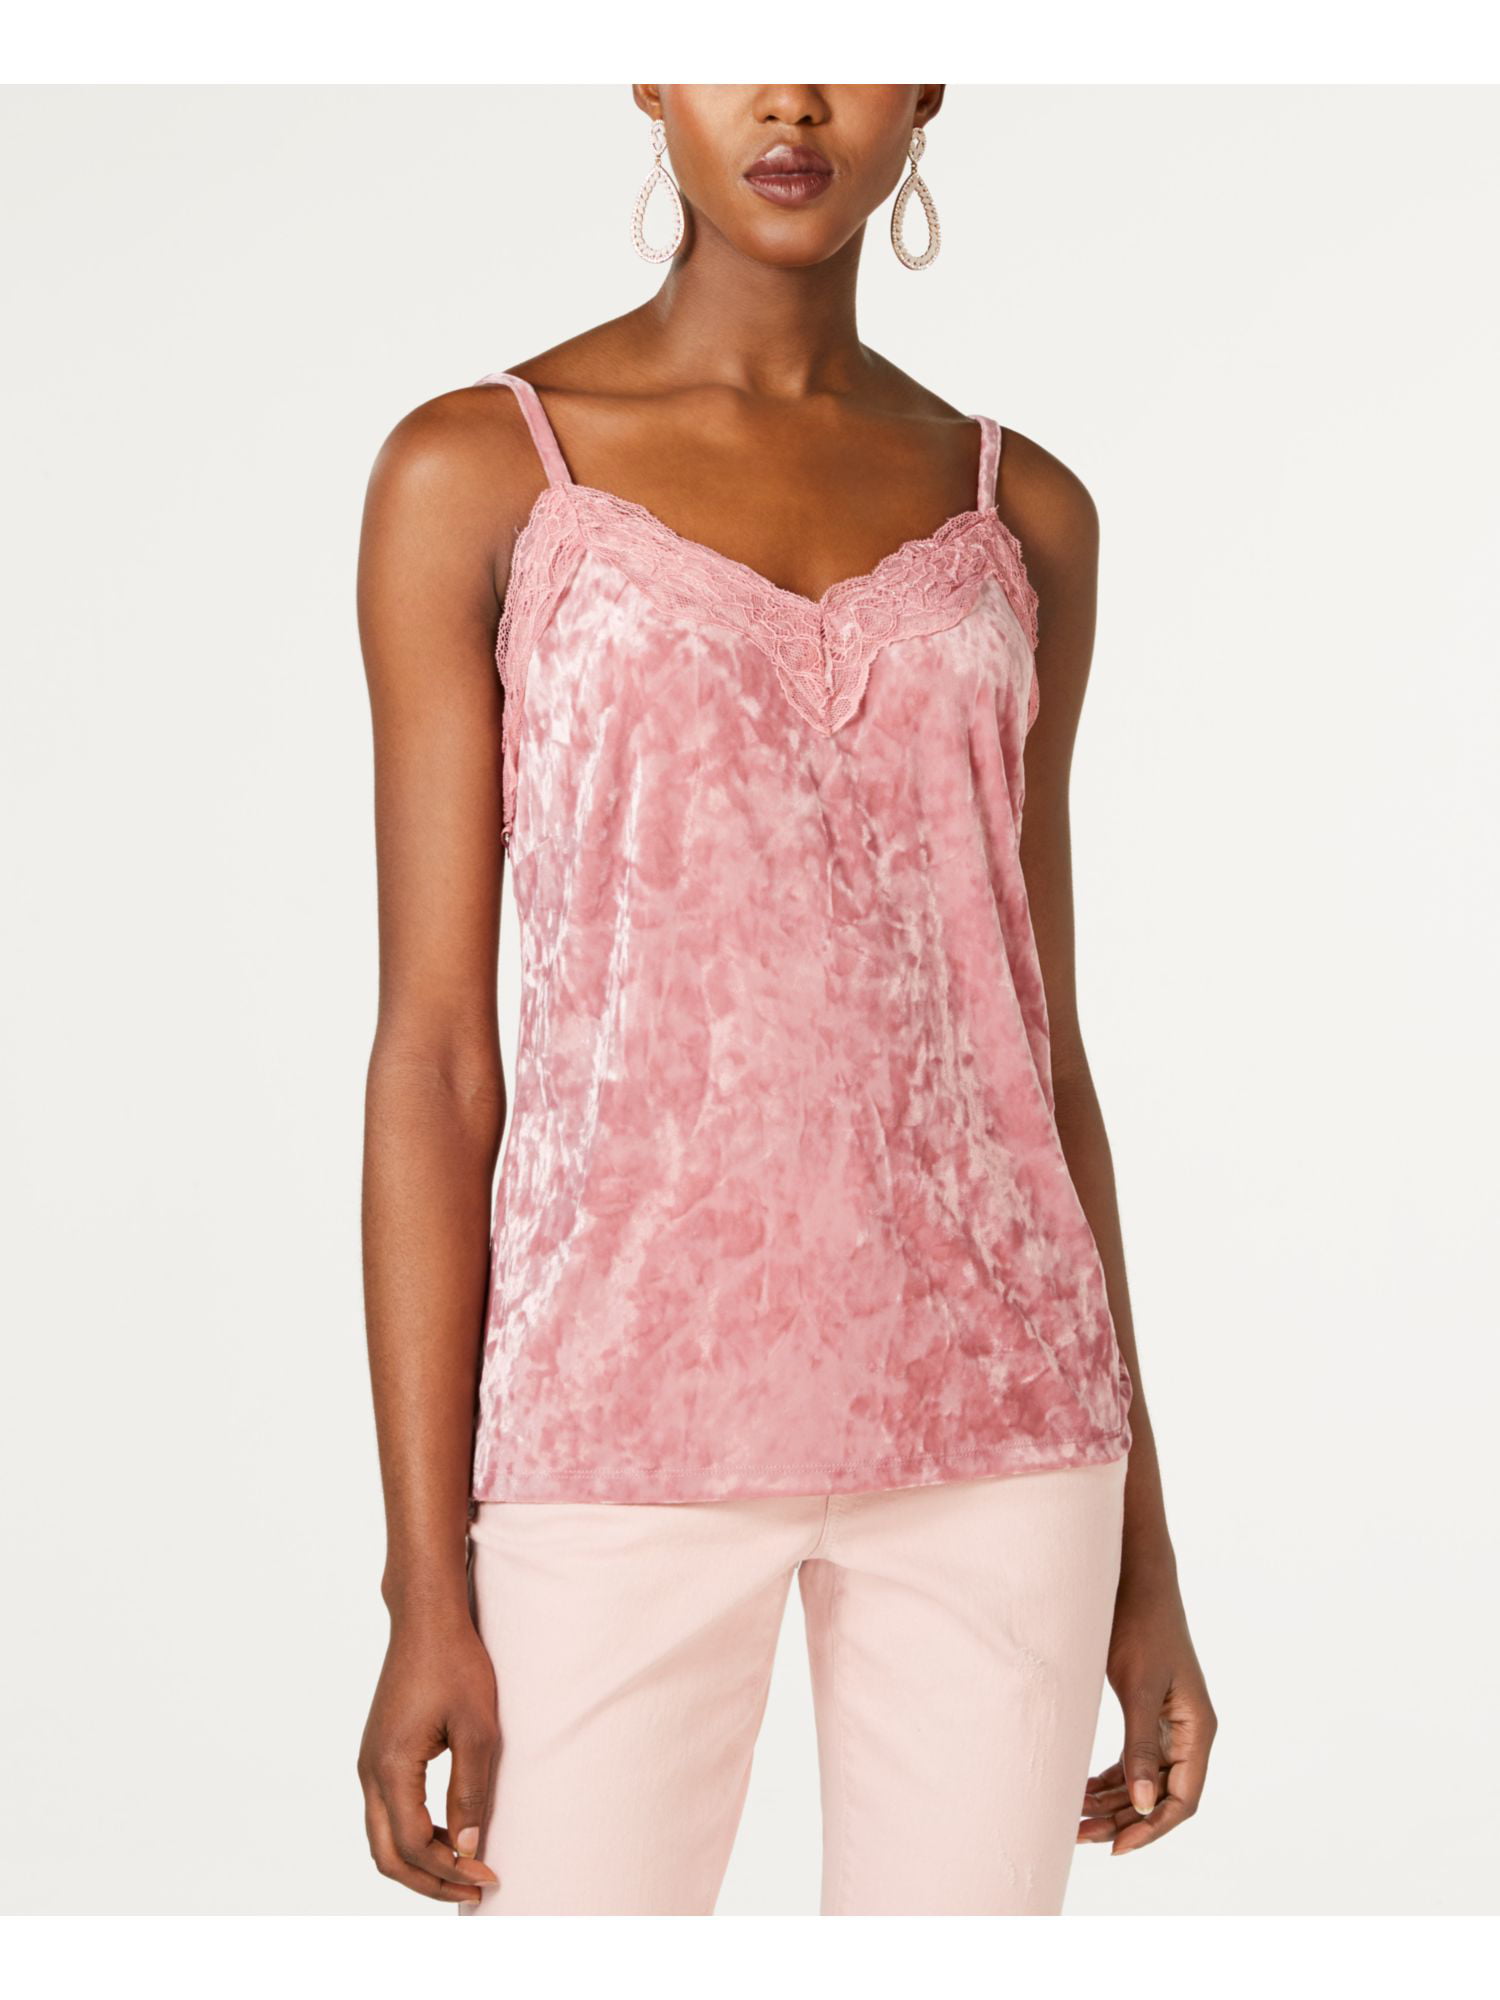 I-N-C Womens Velvet & Lace Cami Tank Top, Pink, Large